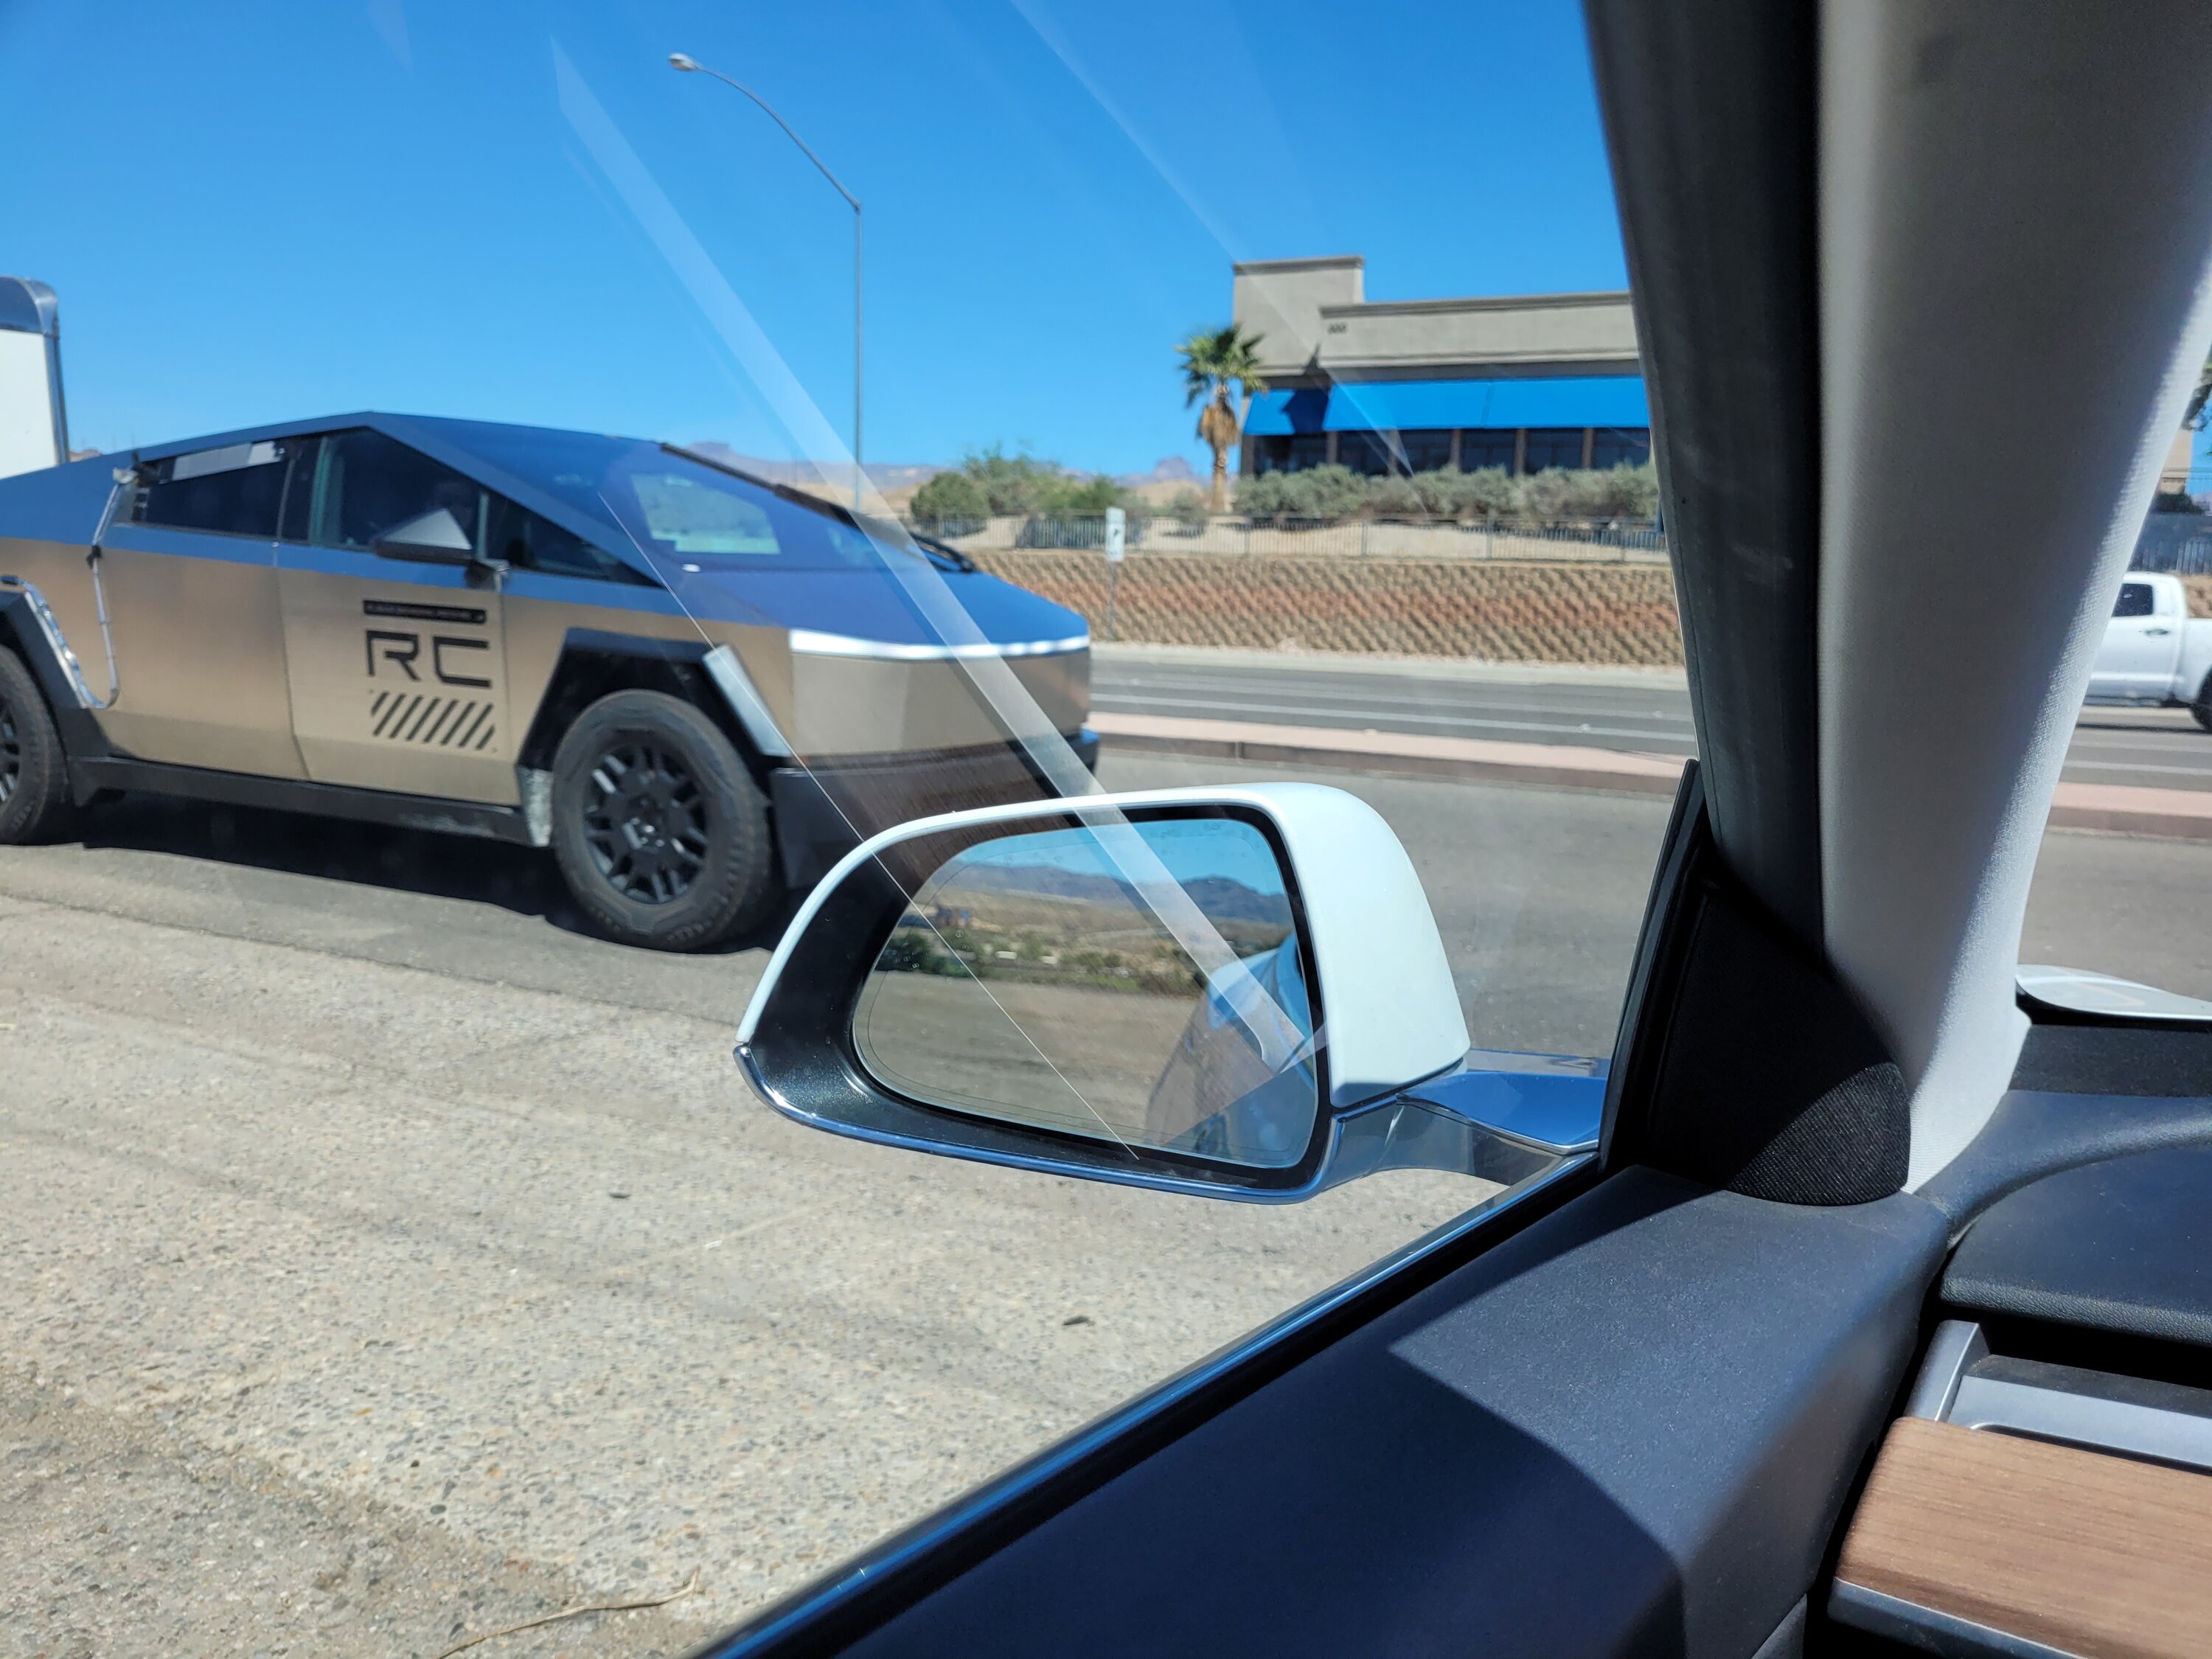 Tesla Cybertruck Why the Cybertruck is in Nevada = SAE J2807 Towing Test 20230906_140456